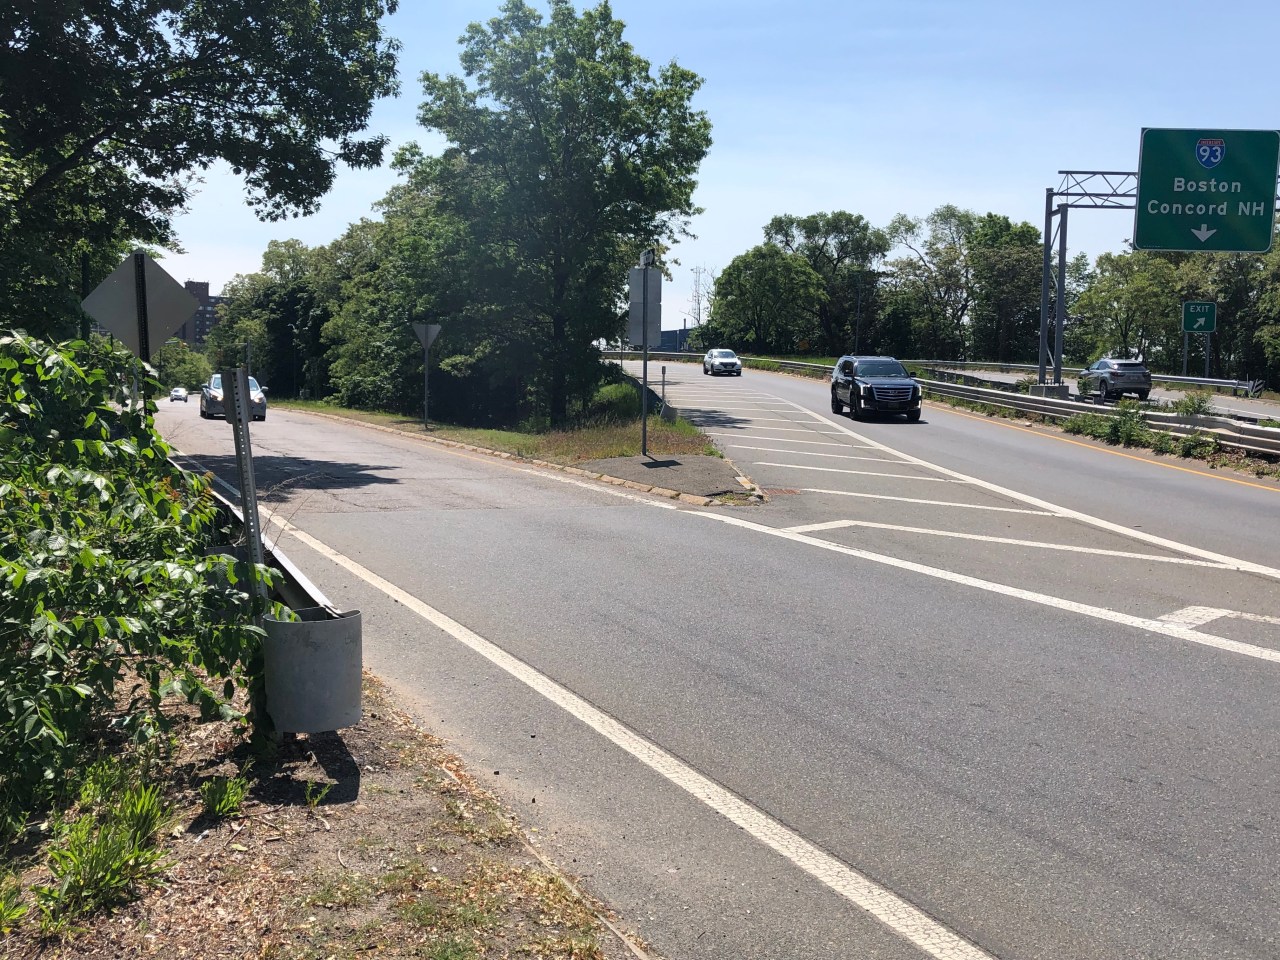 Multiple motor vehicle lanes merge together on a highway surrounded by trees. A green interstate highway sign above the lanes to the right reads "Interstate 93 Boston Concord NH" above a smaller "Exit" sign.